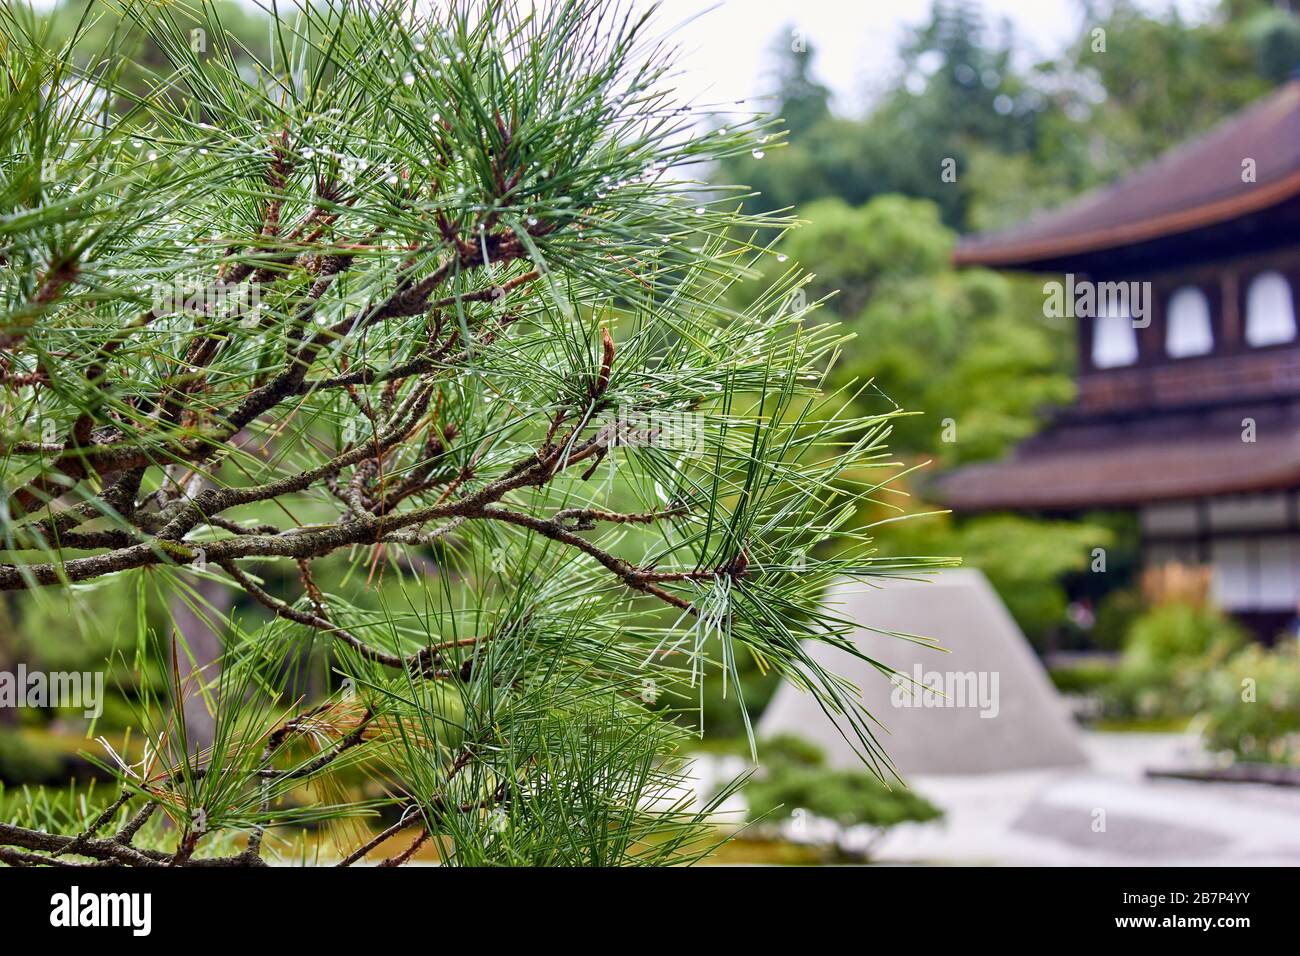 Wet pine in the garden with water droplets on it Stock Photo